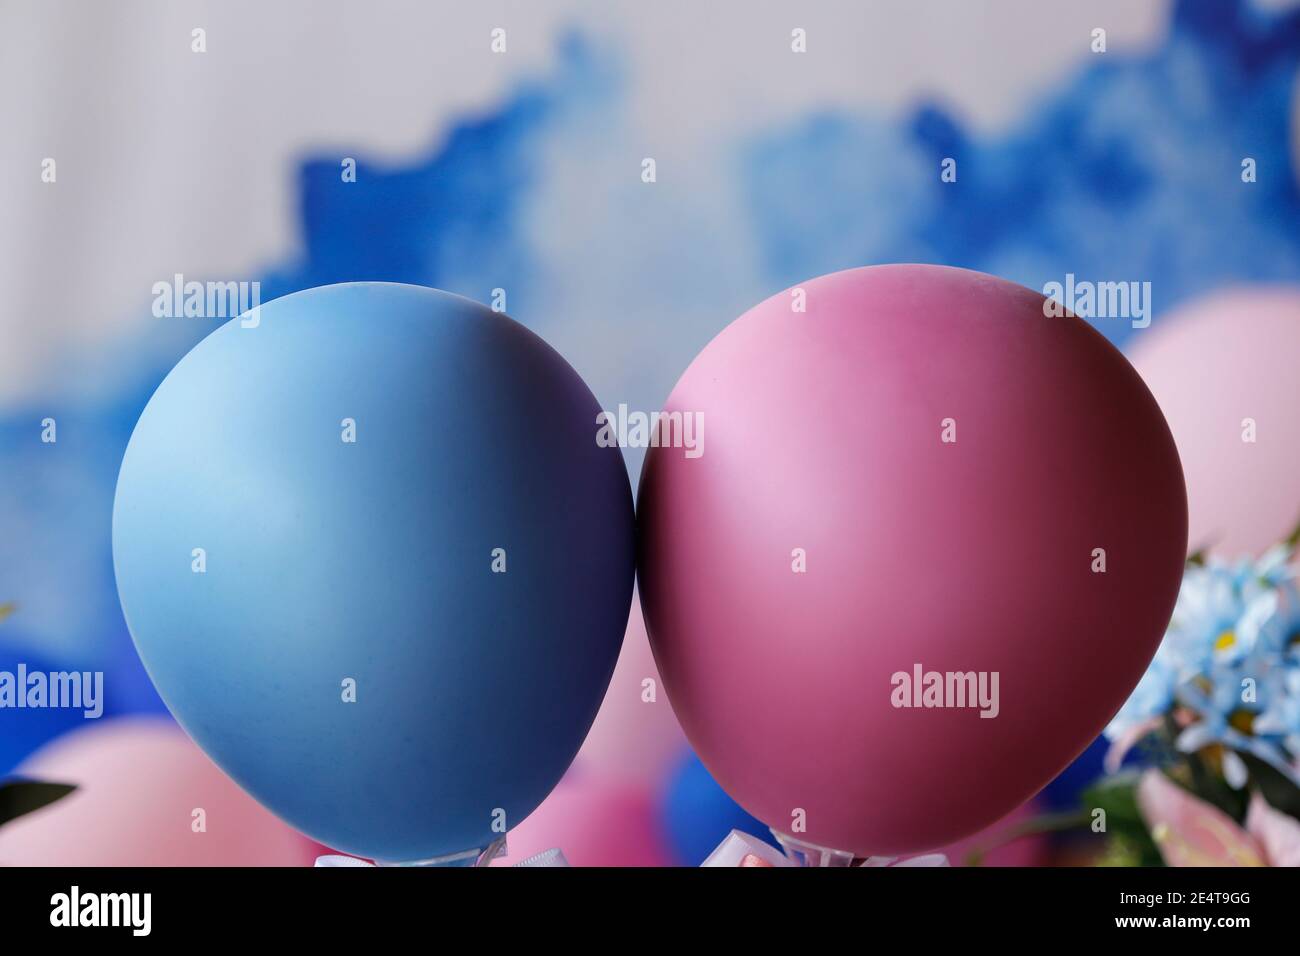 Blue and pink balls at revelation tea party - baby gender reveal party concept Stock Photo